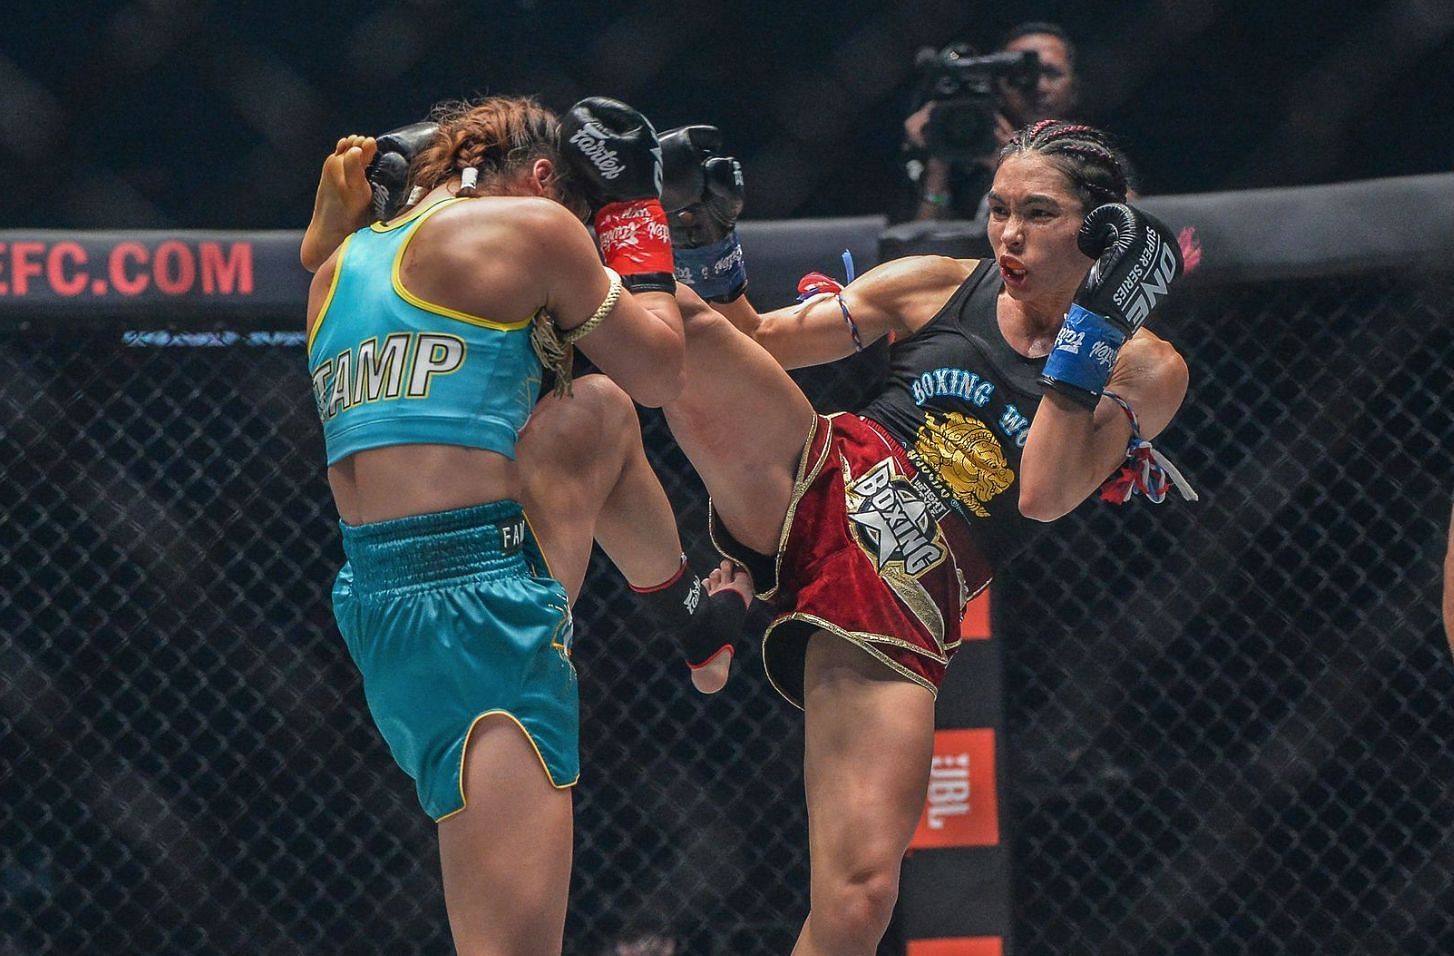 Janet Todd (R) made the proper adjustments in her rematch with Stamp Fairtex (L). | Photo by ONE Championship